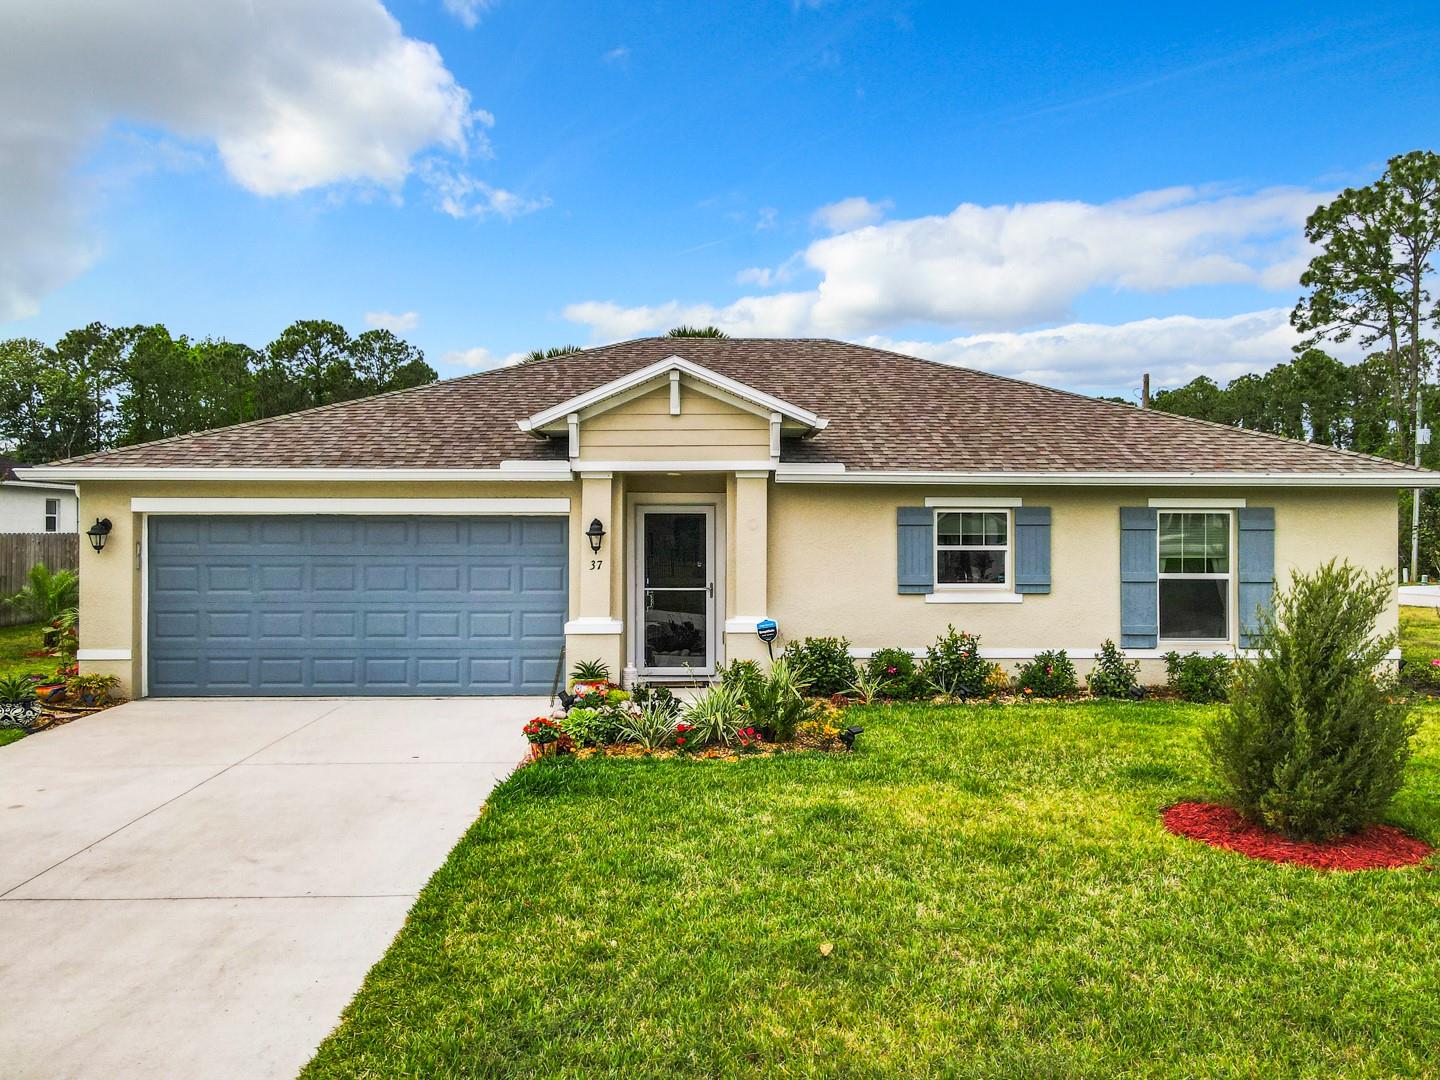 37 Powder Hill Lane, Other City - In The State Of Florida FL 32164